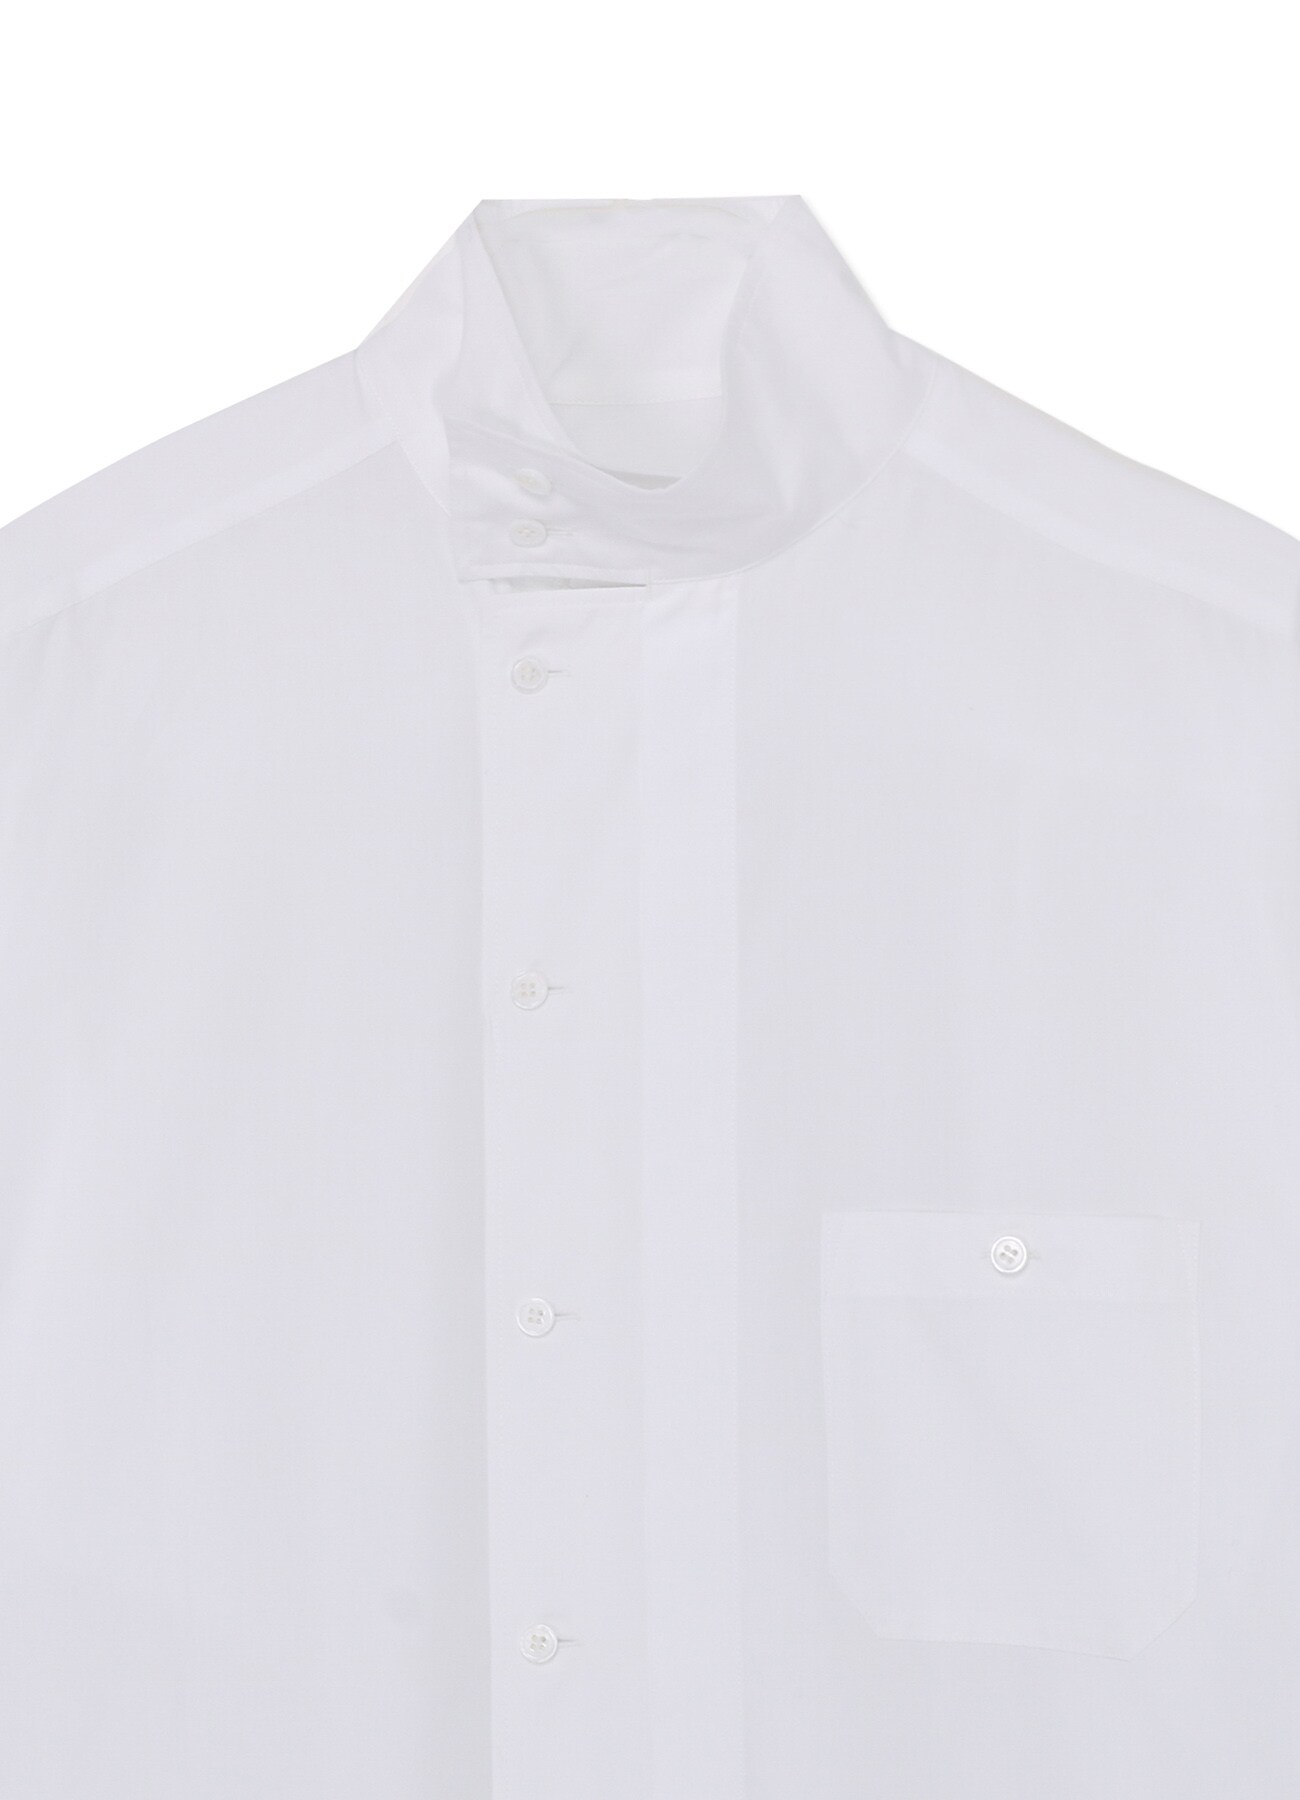 COTTON BROADCLOTH HALF DOUBLE COLLAR SHIRT(S WHITE): Y's for men｜WILDSIDE  YOHJI YAMAMOTO [Official